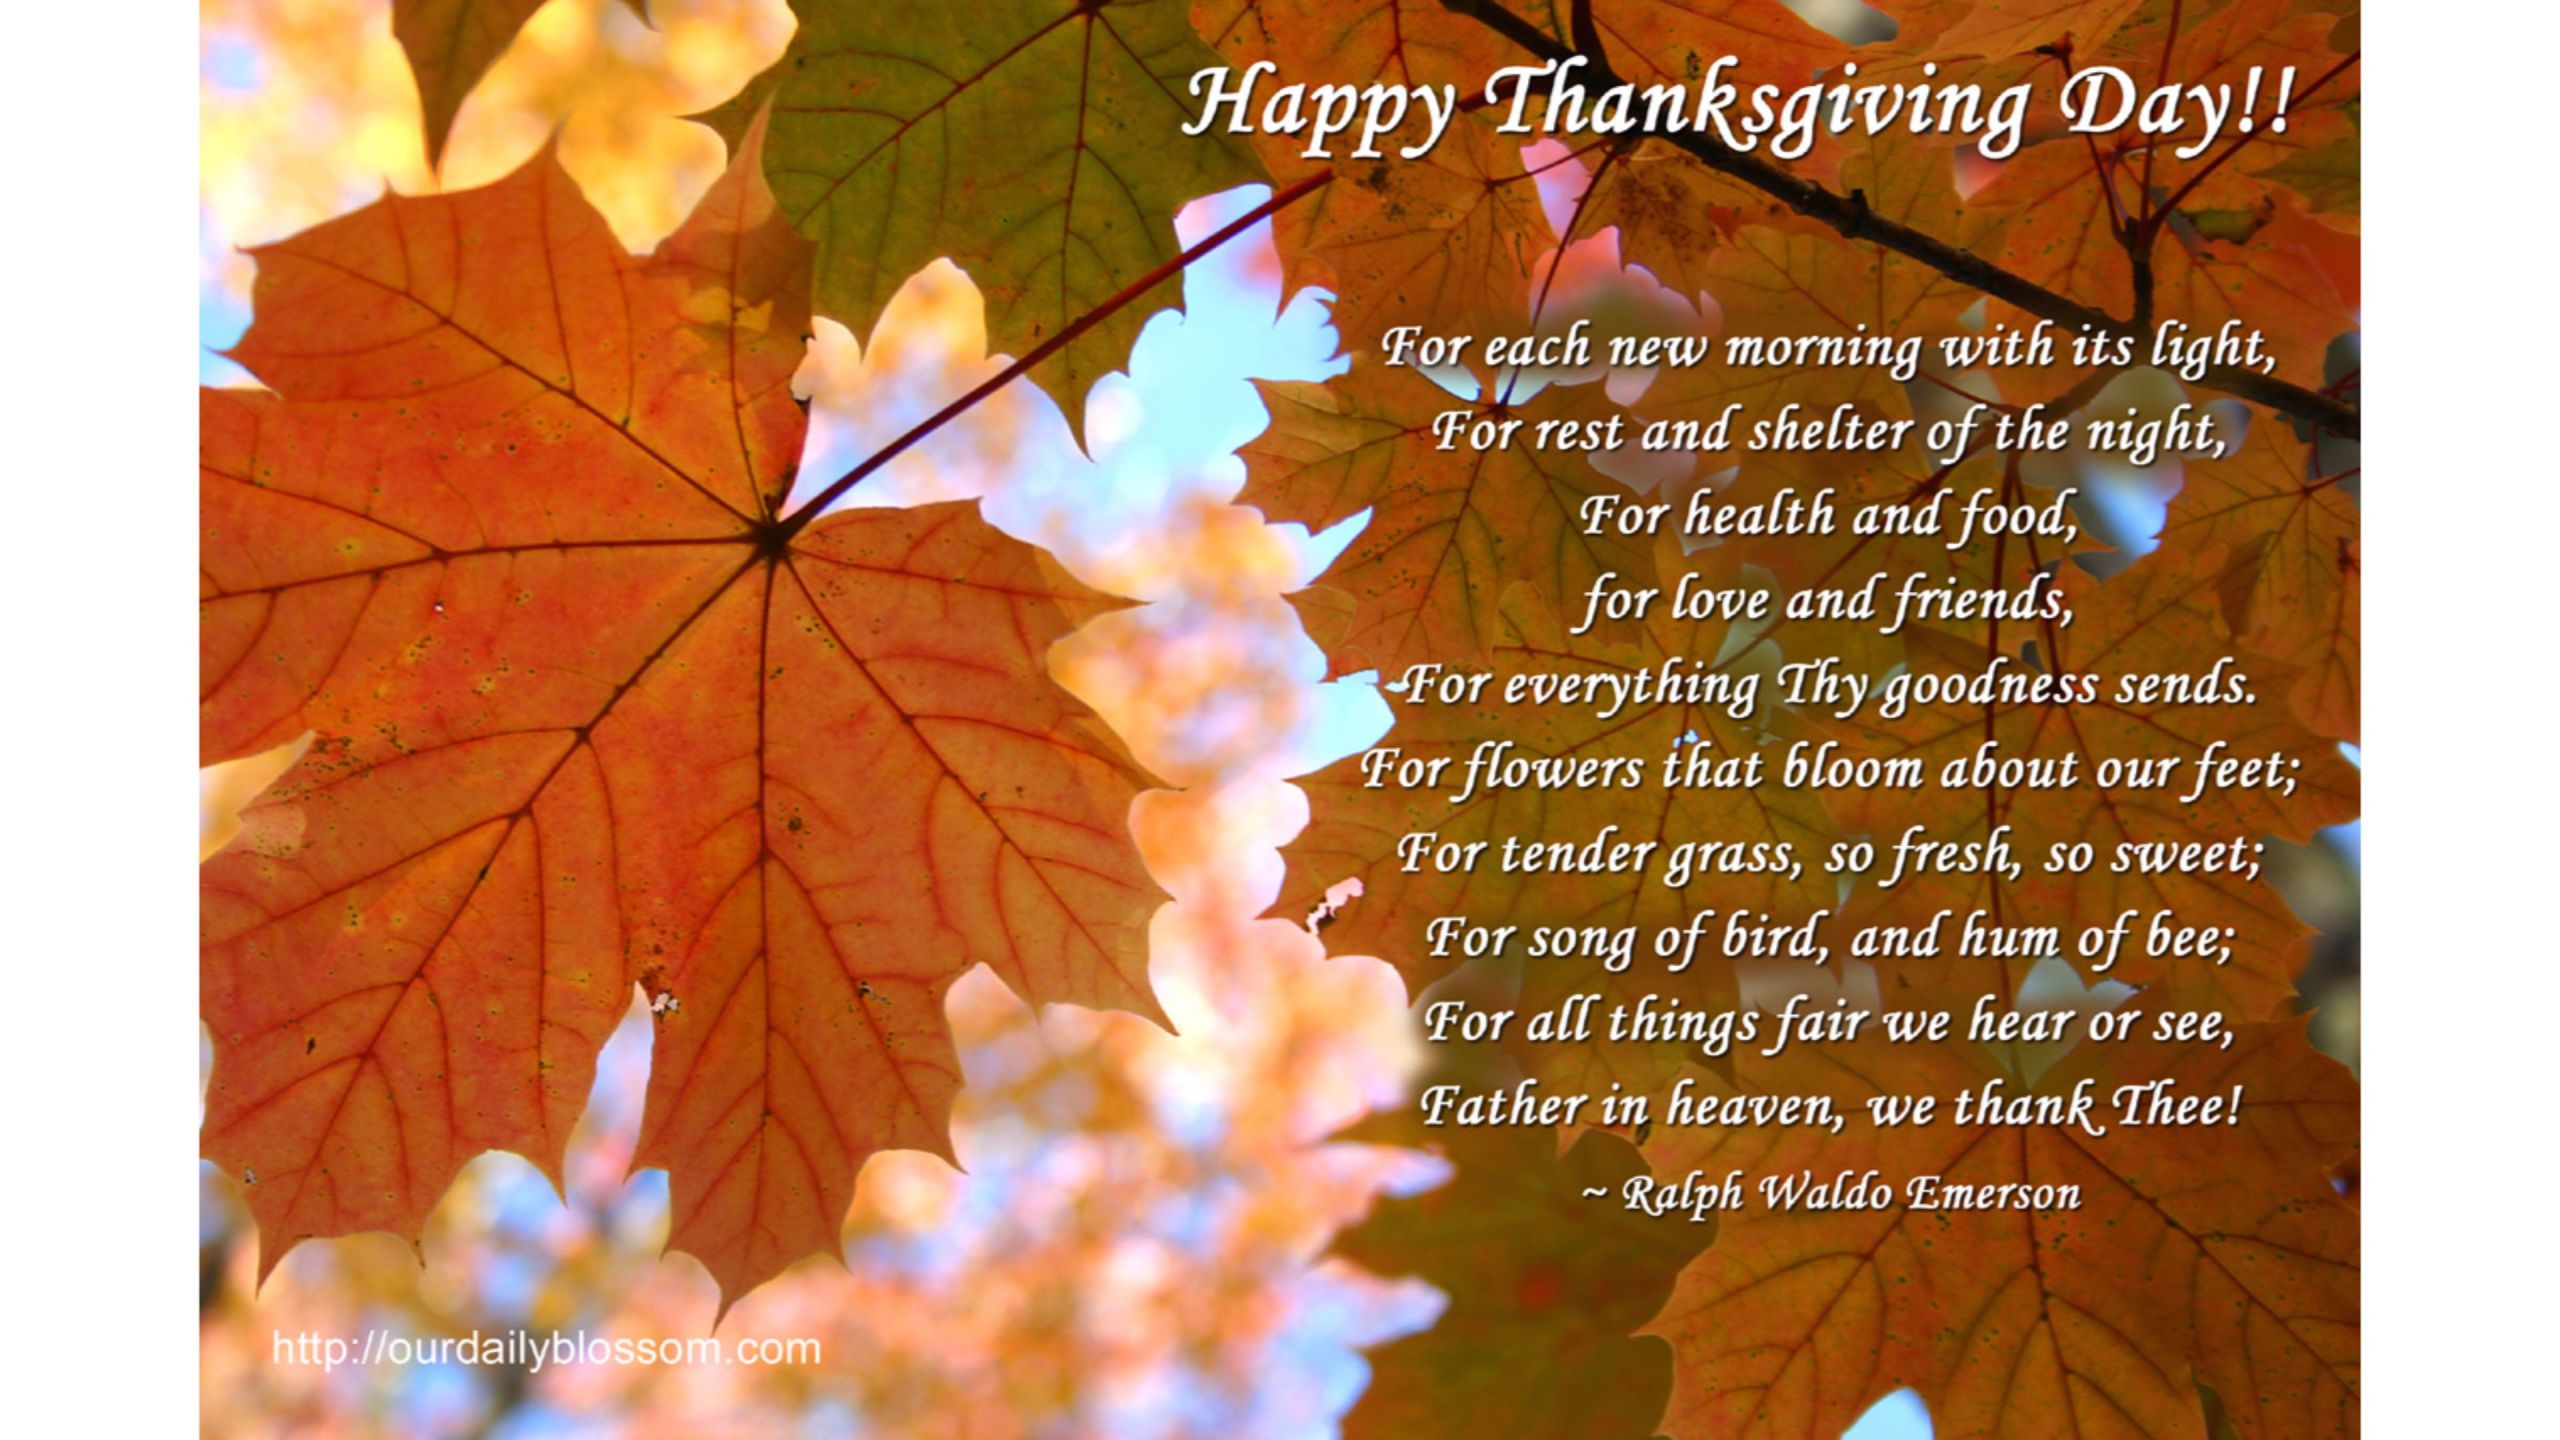 Thanksgiving Quotes Wallpaper
 quotes wallpapers photos and desktop backgrounds up to 8K